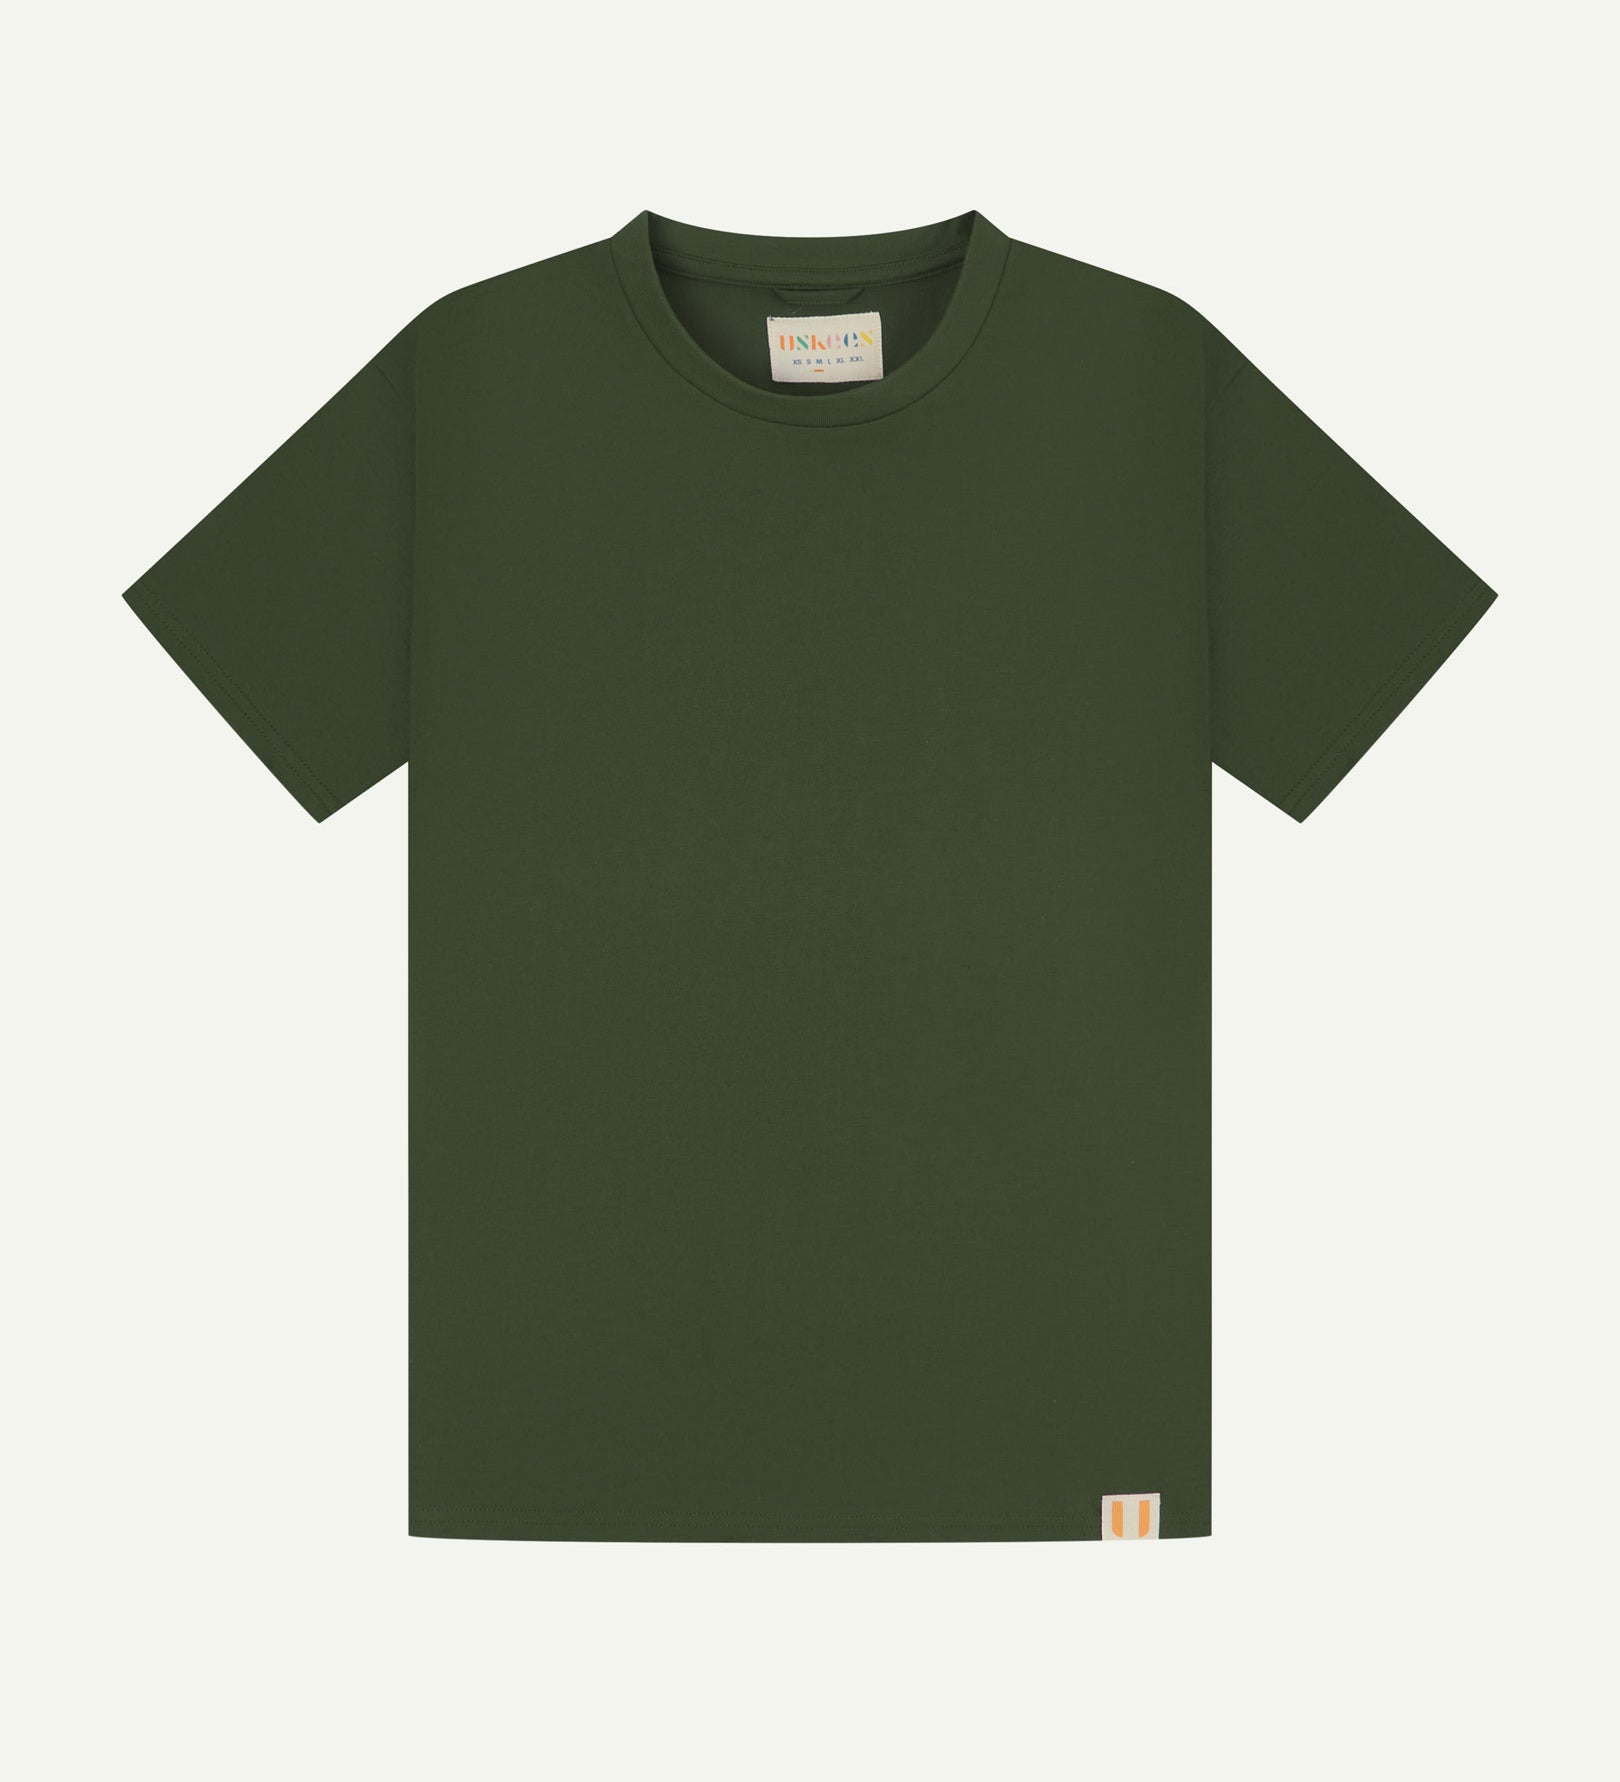 Full flat view of coriander green organic cotton Uskees T-shirt for men.